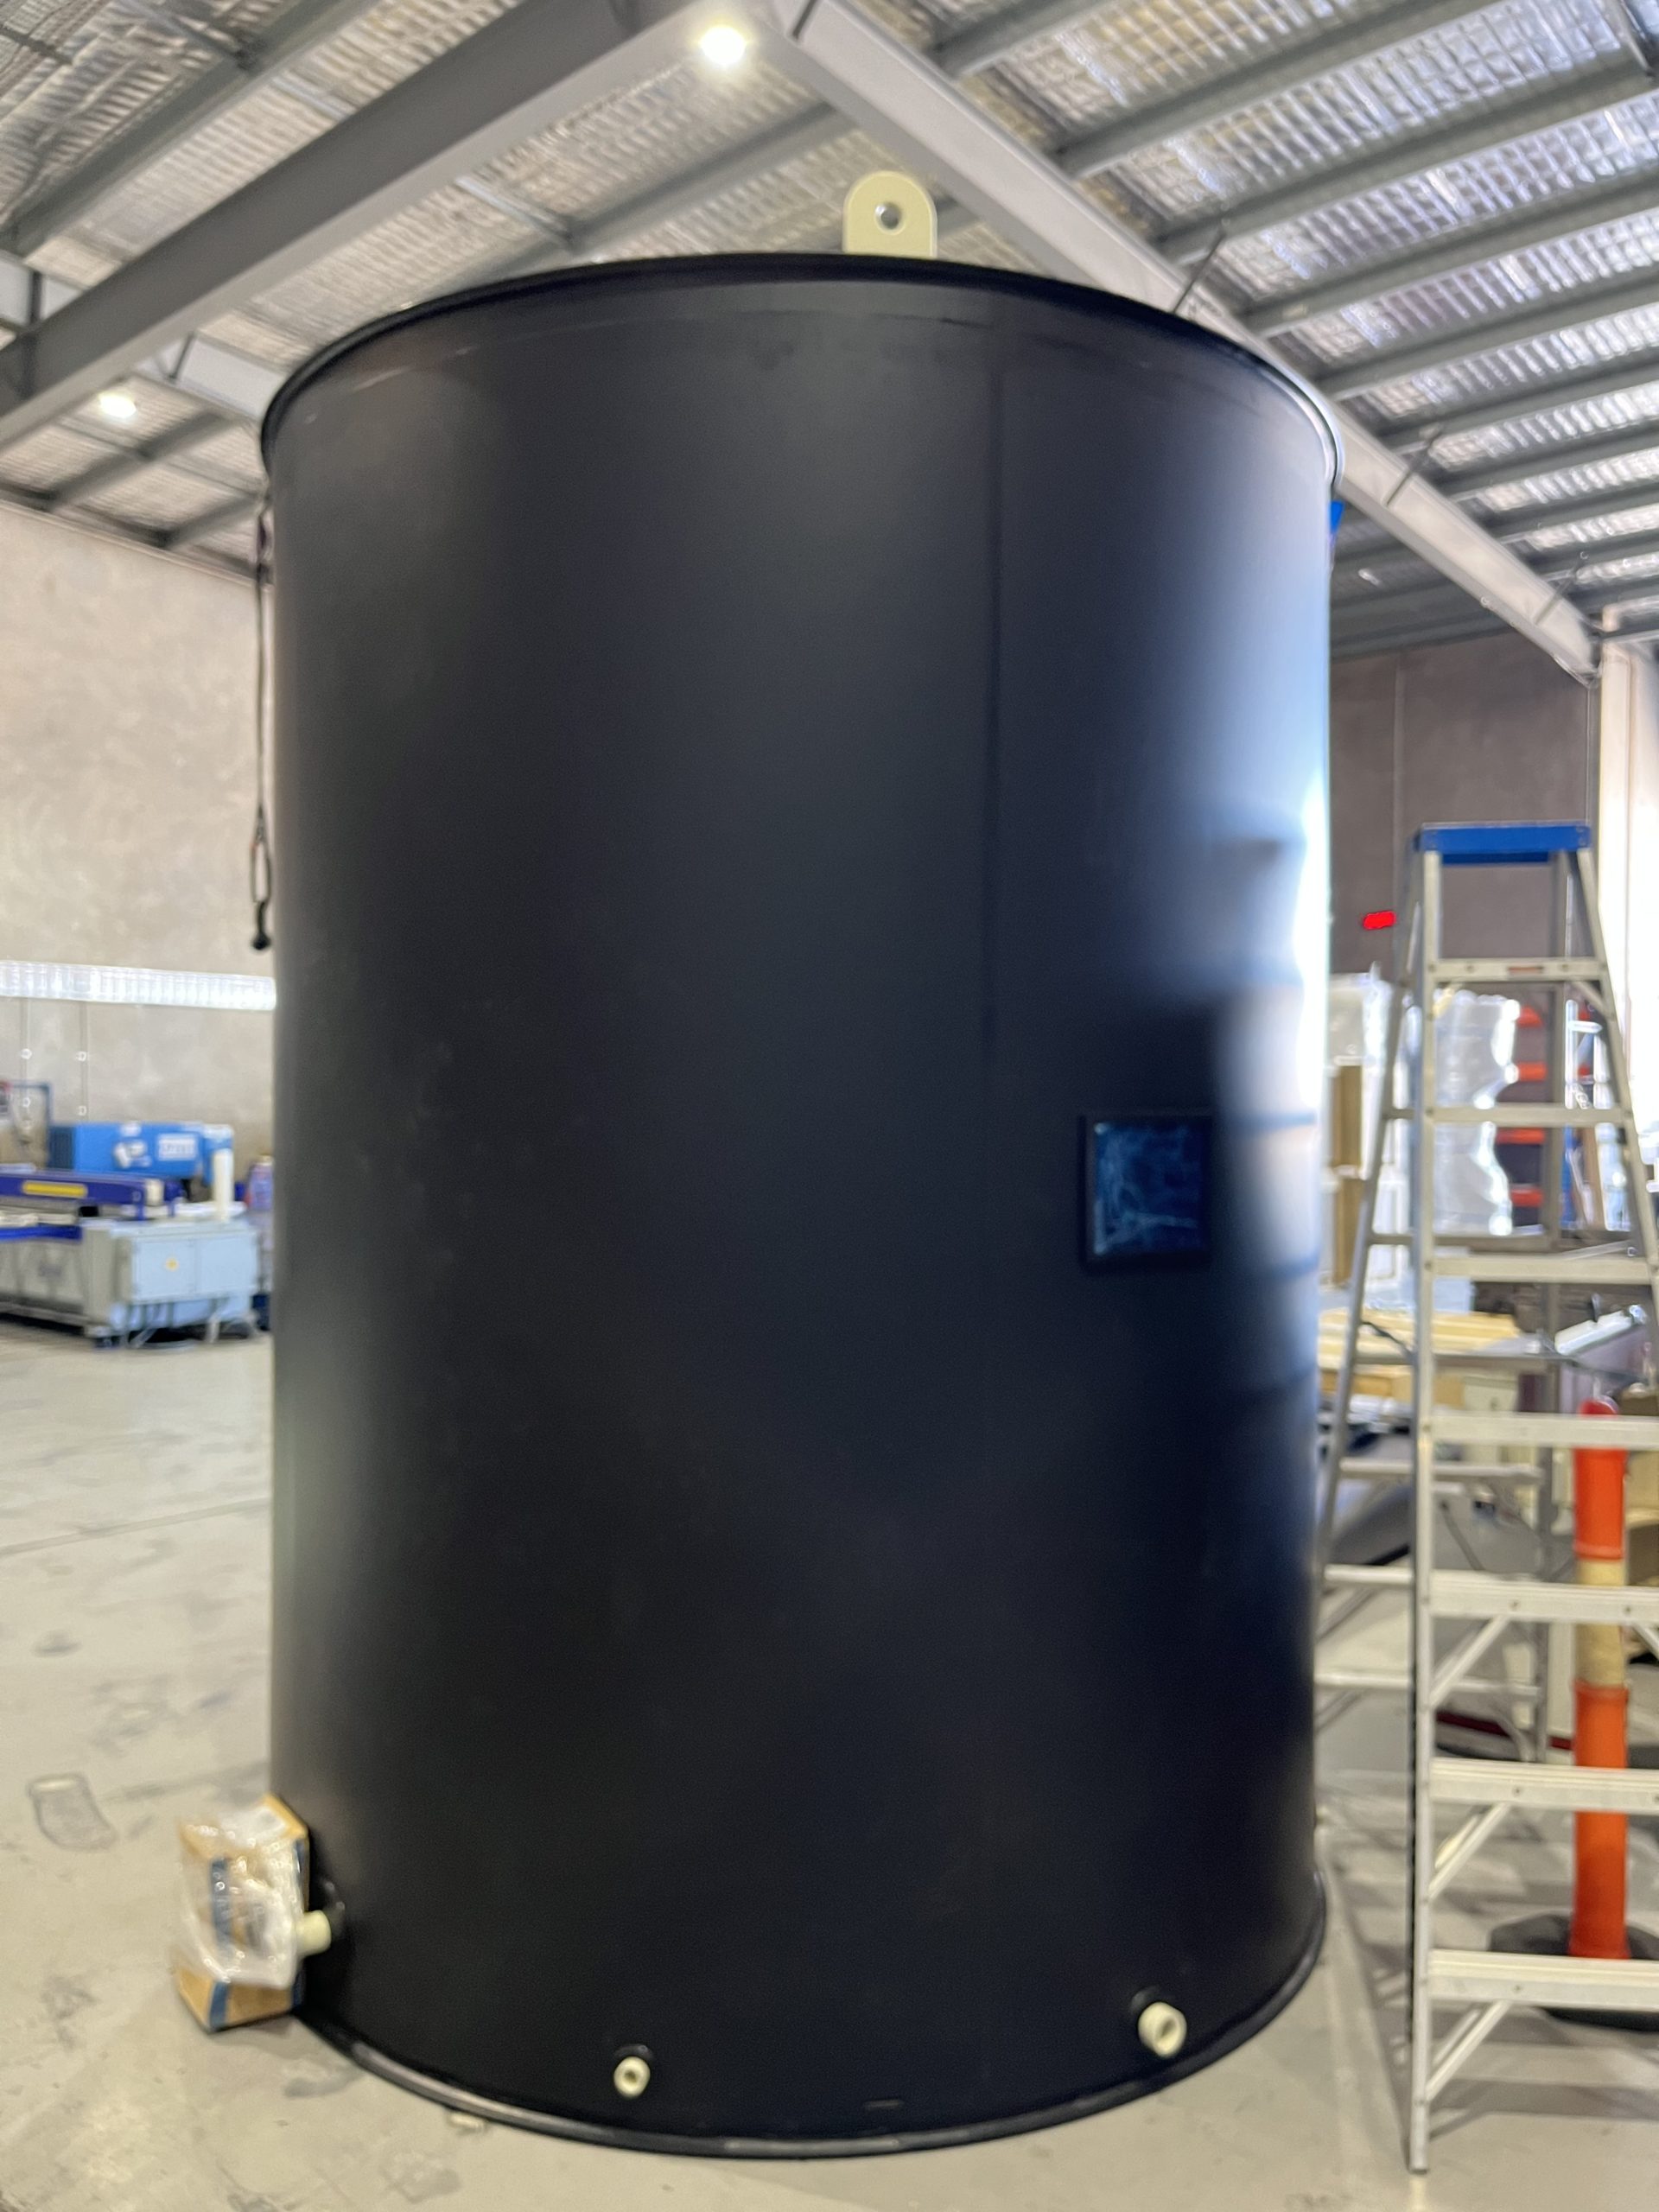 Insulated Hot Water Tank for a Bakery